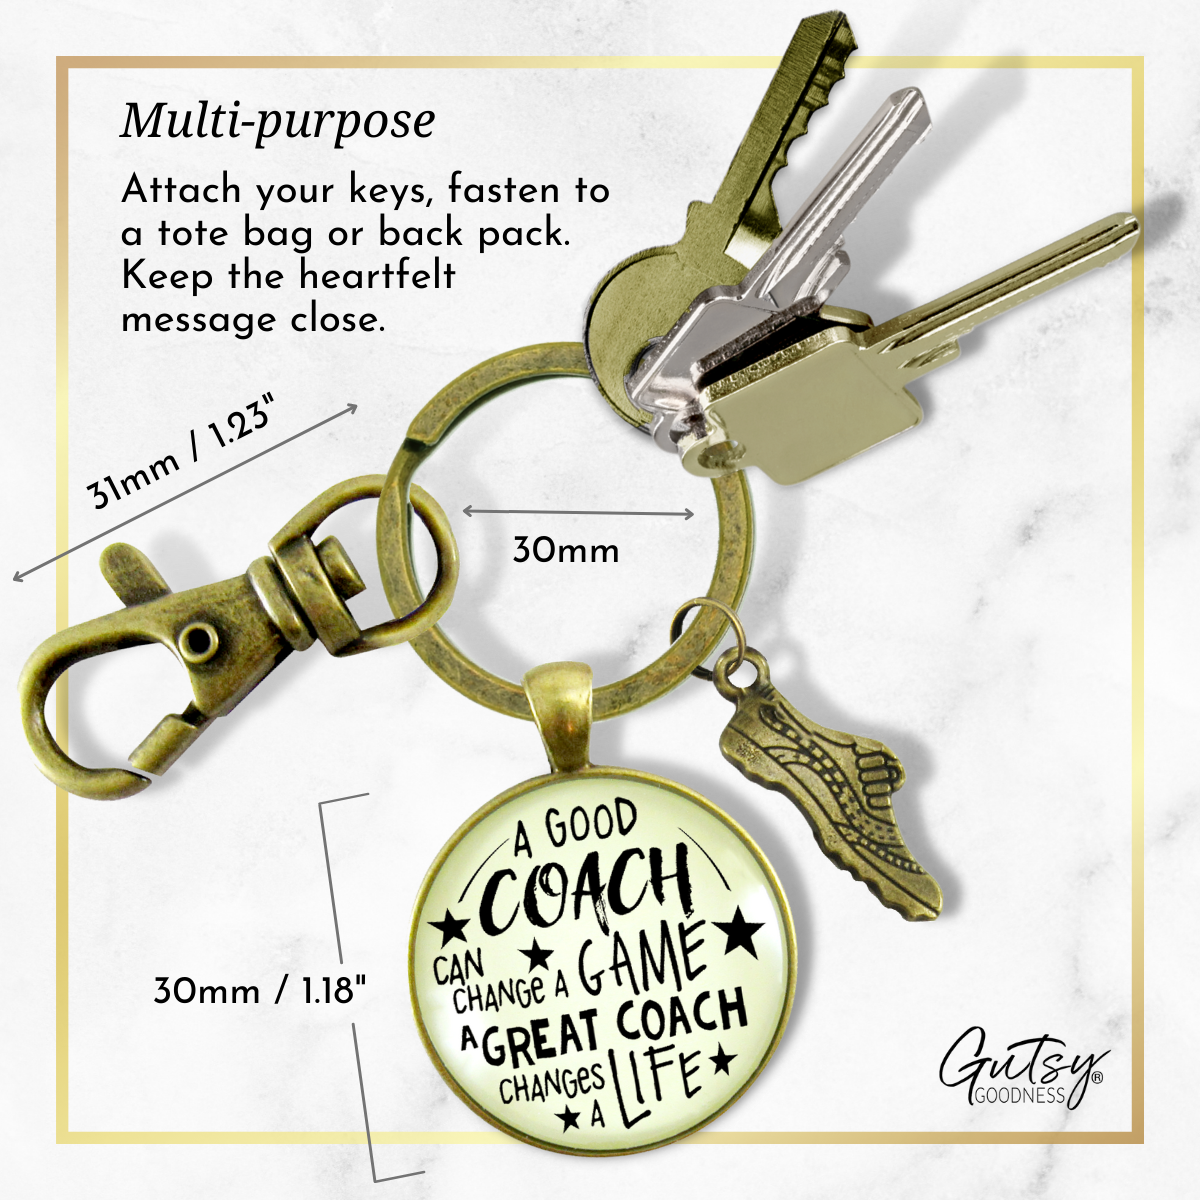 Cross Country Coaching Keychain Great Coach Changes Life Thank You Gift Running Track Shoe - Gutsy Goodness Handmade Jewelry;Cross Country Coaching Keychain Great Coach Changes Life Thank You Gift Running Track Shoe - Gutsy Goodness Handmade Jewelry Gifts